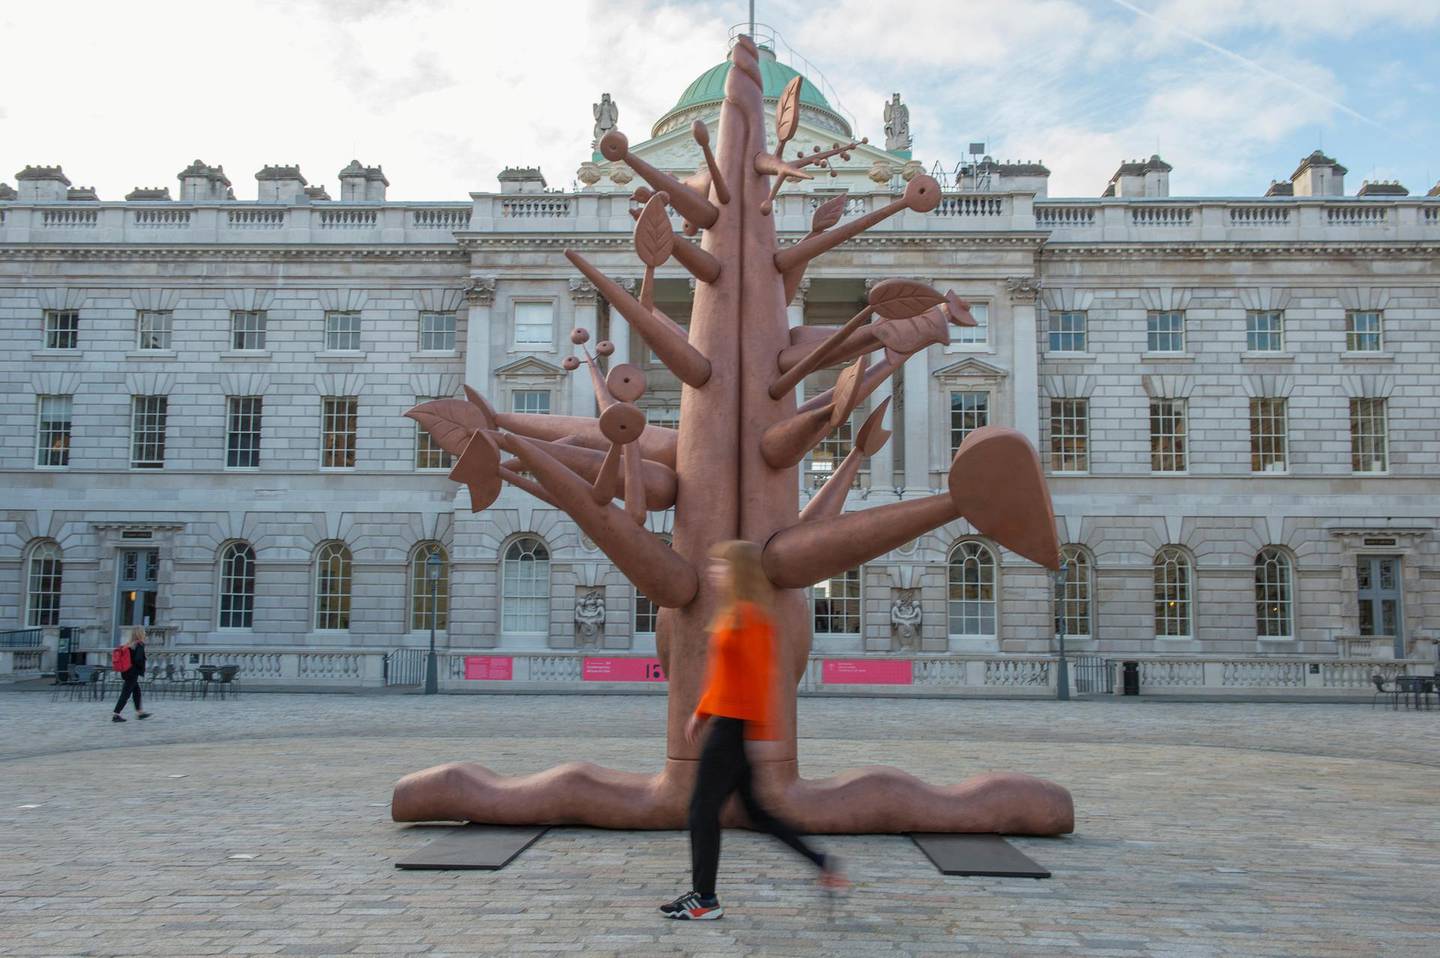 PRGY7A Somerset House, London, UK. 3 October, 2018. 1-54 Contemporary African Art Fair opens 4-7 October 2018 with Sudanese artist Ibrahim El-Salahi?s Meditation Tree sculpture installed in the Edmond J Safra Fountain Court. Credit: Malcolm Park/Alamy Live News.